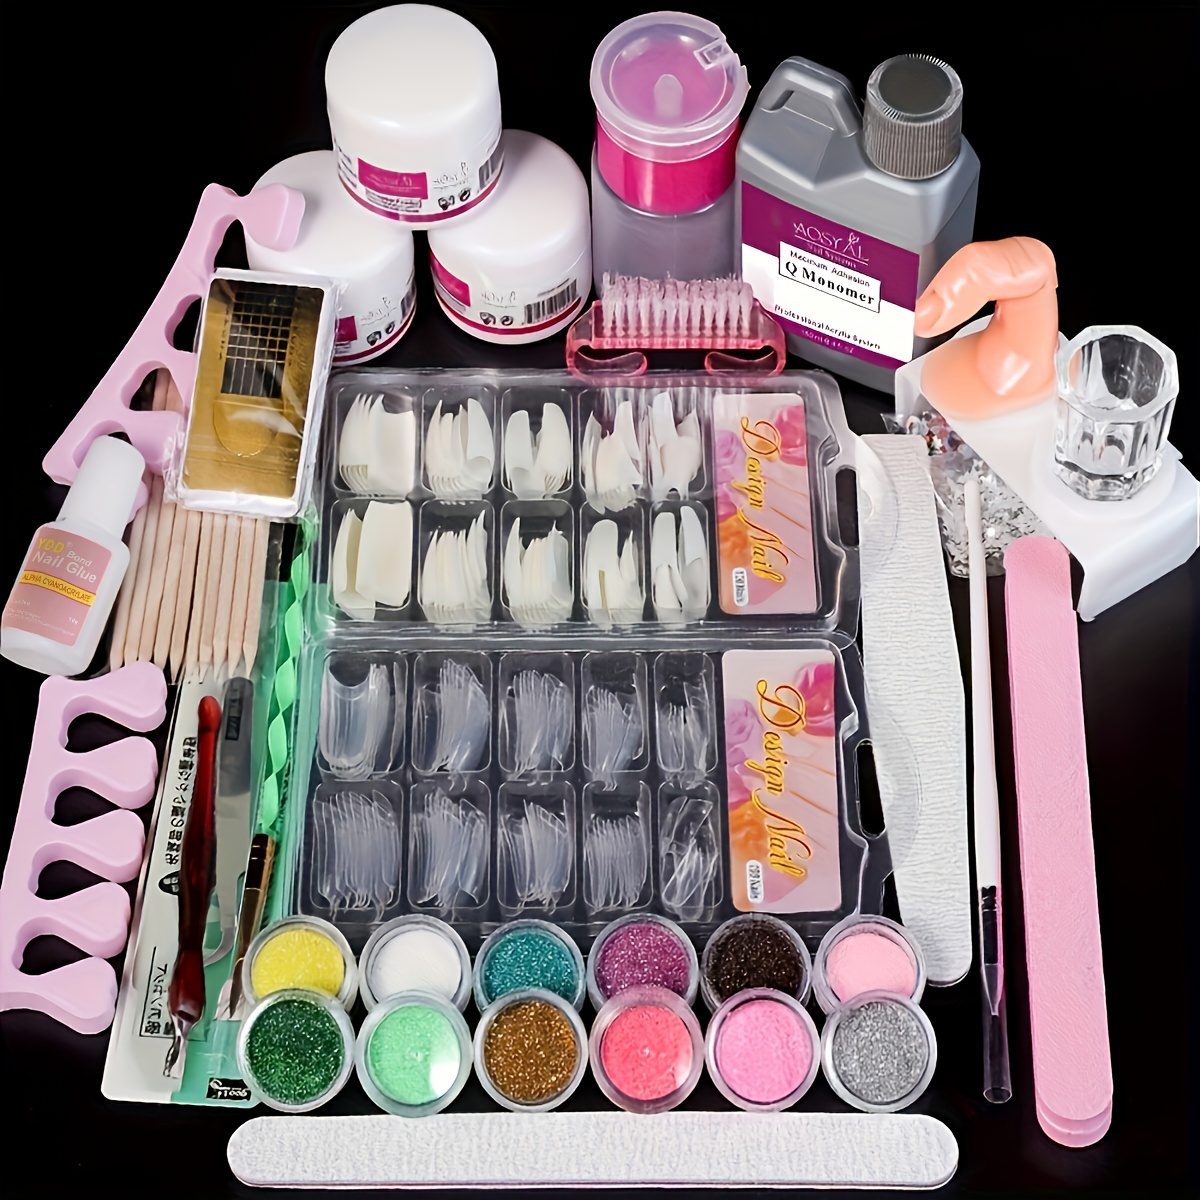 Buy Khelni Artificial Nails Set With Glue Acrylic Face Nails Set Of 50 Pcs Artificial  Nails Reusable Online at Low Prices in India - Amazon.in